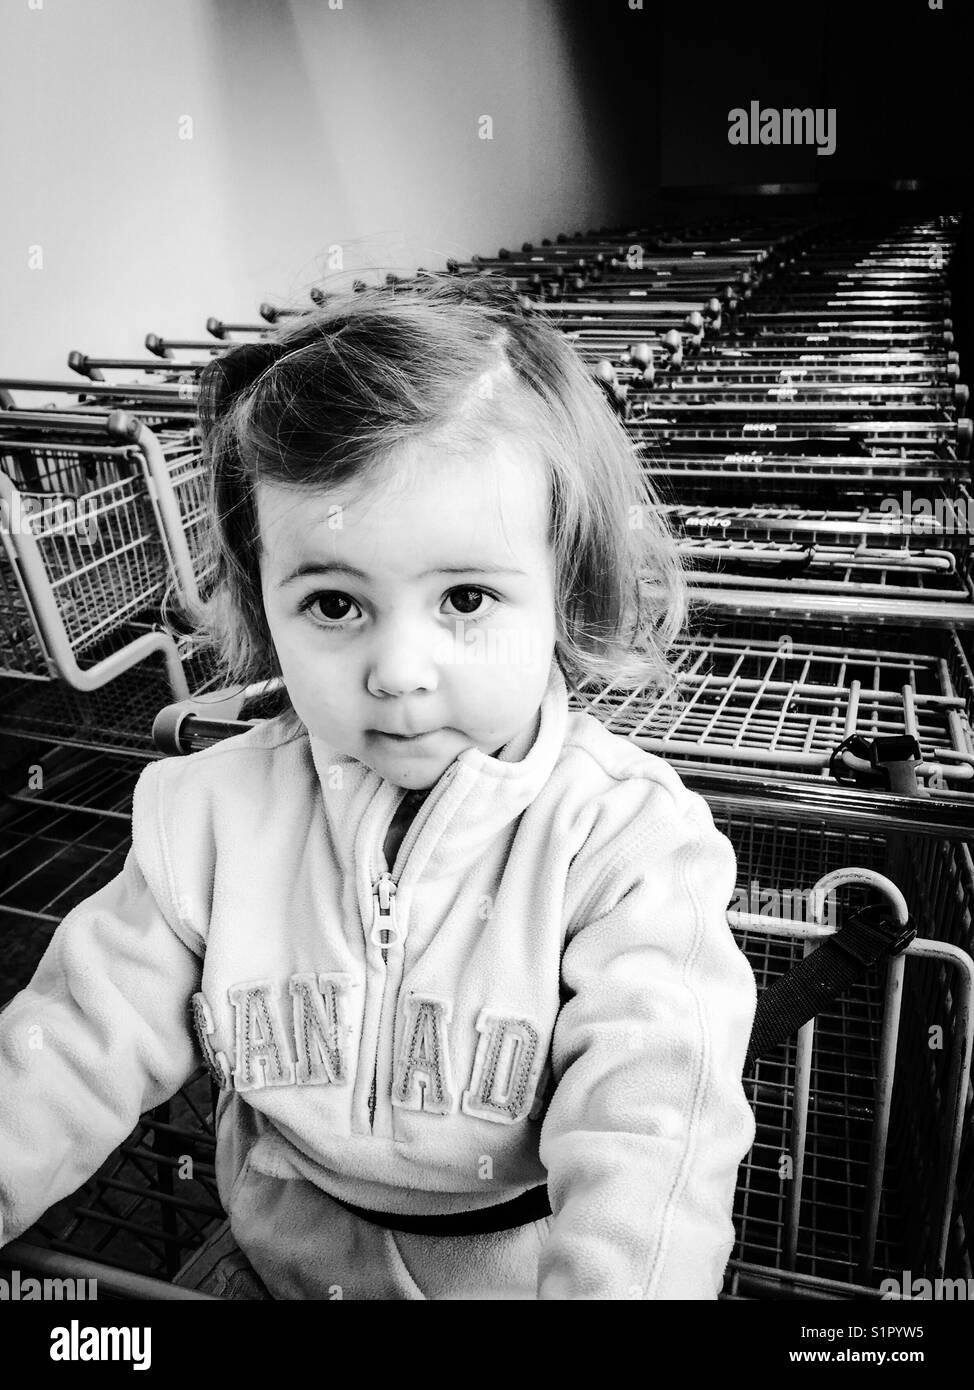 Toddler girl in grocery cart with rows of carts behind her Stock Photo